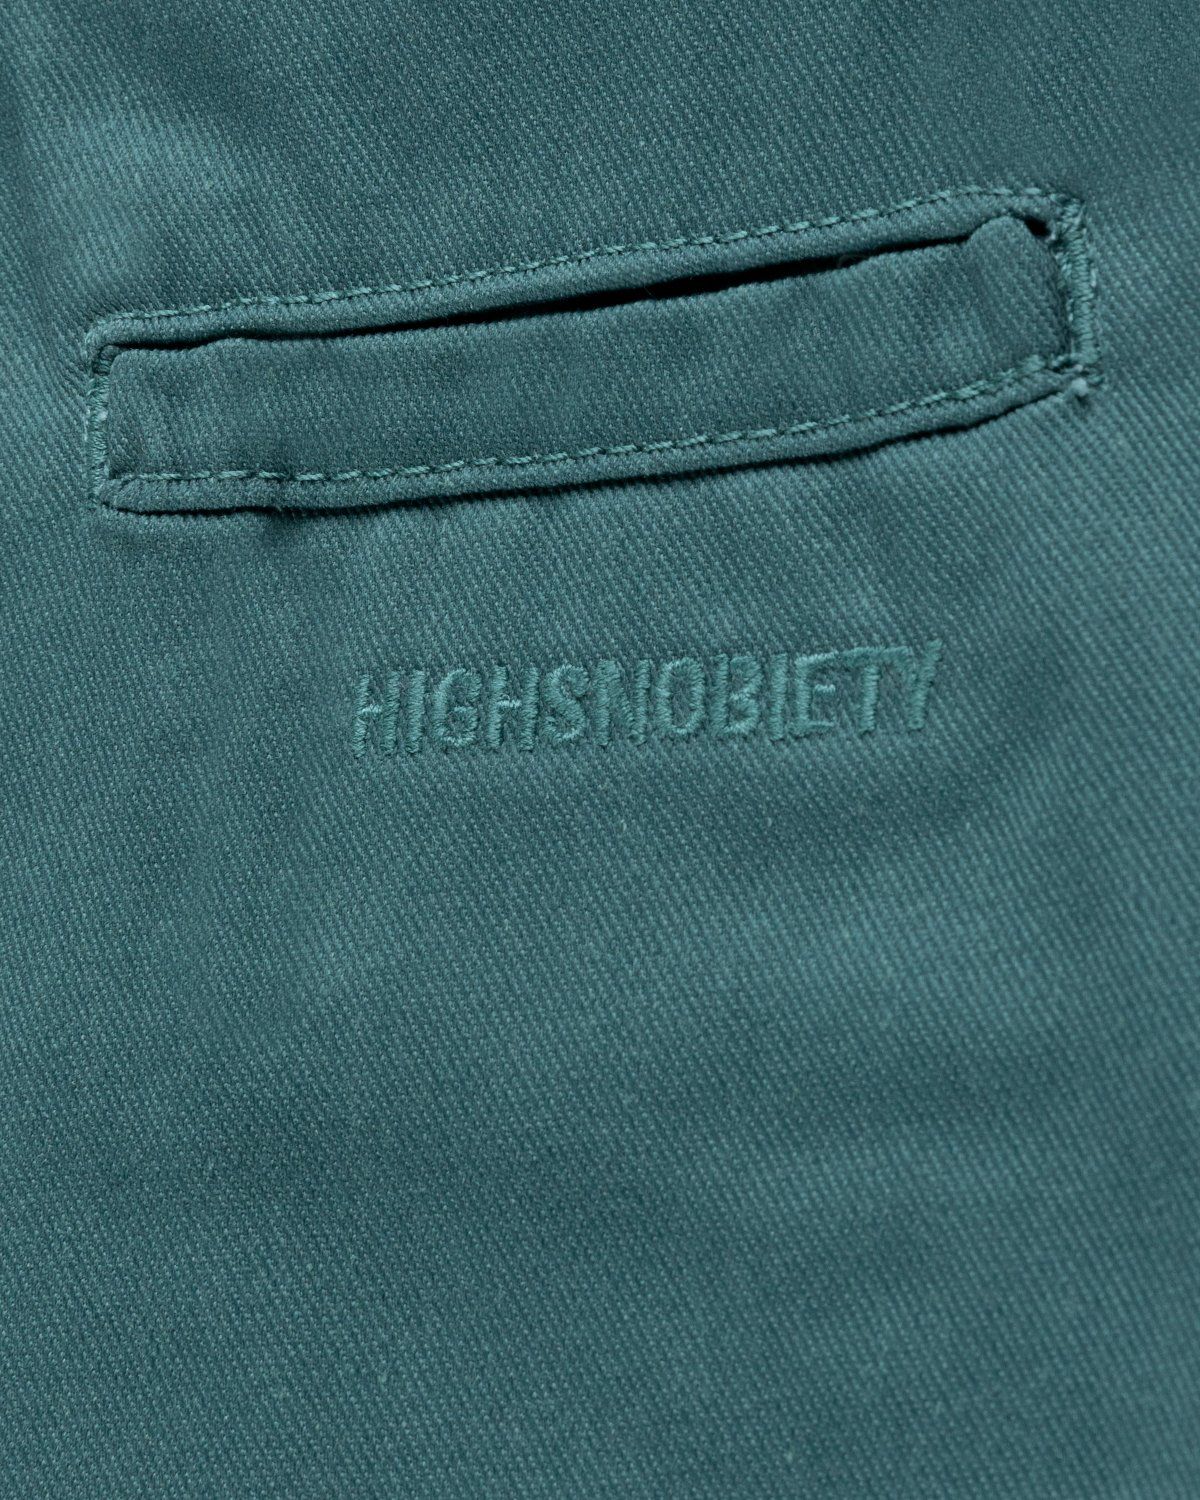 Highsnobiety x Dickies – Pleated Work Pants Lincoln Green - Work Pants - Green - Image 4